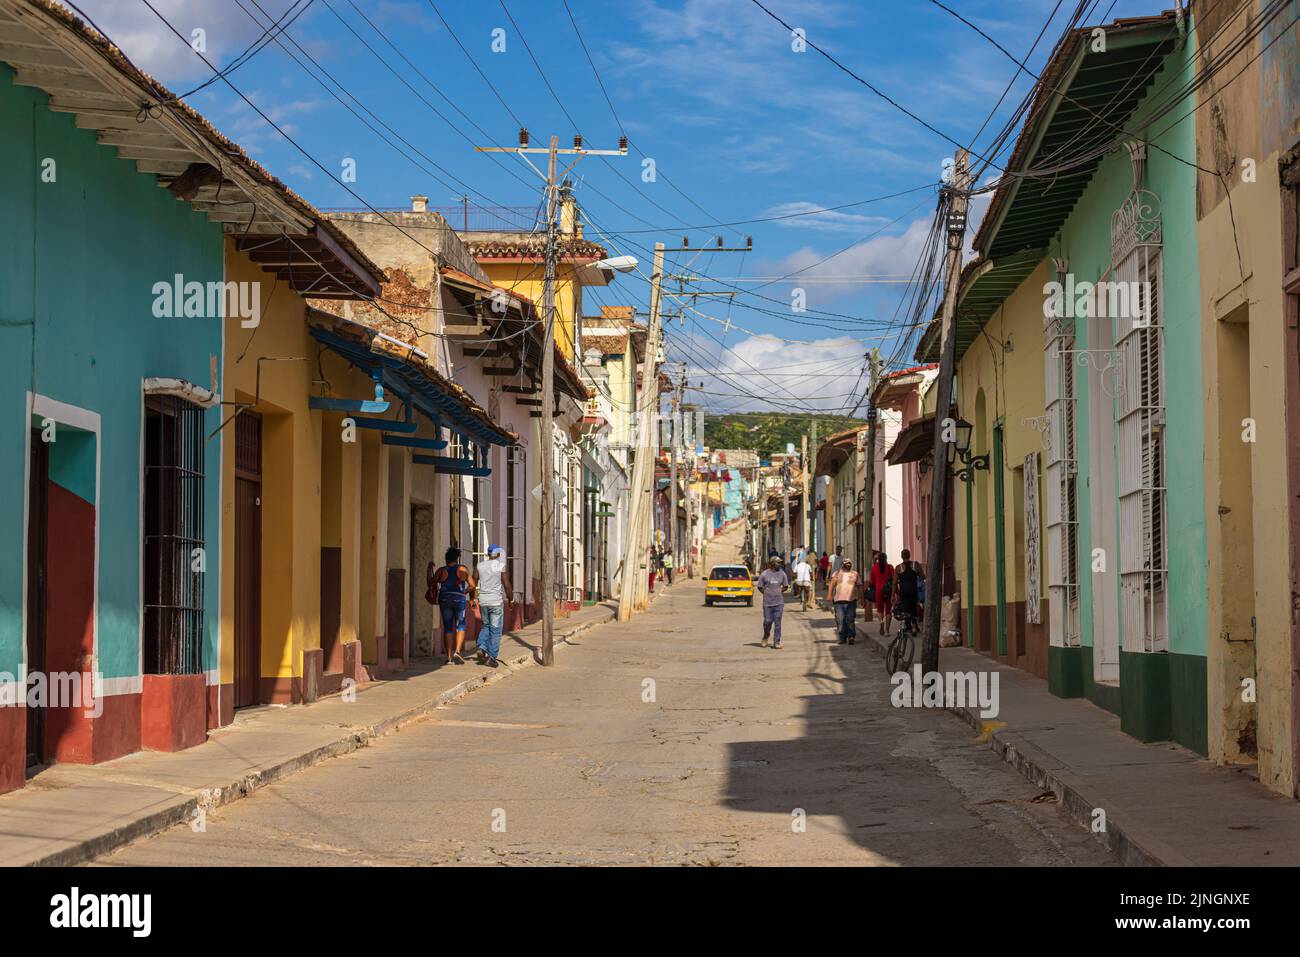 TRINIDAD, CUBA, JANUARY, 7: Colorful houses in the historic streets on January 7, 2021 in Trinidad, Cuba Stock Photo